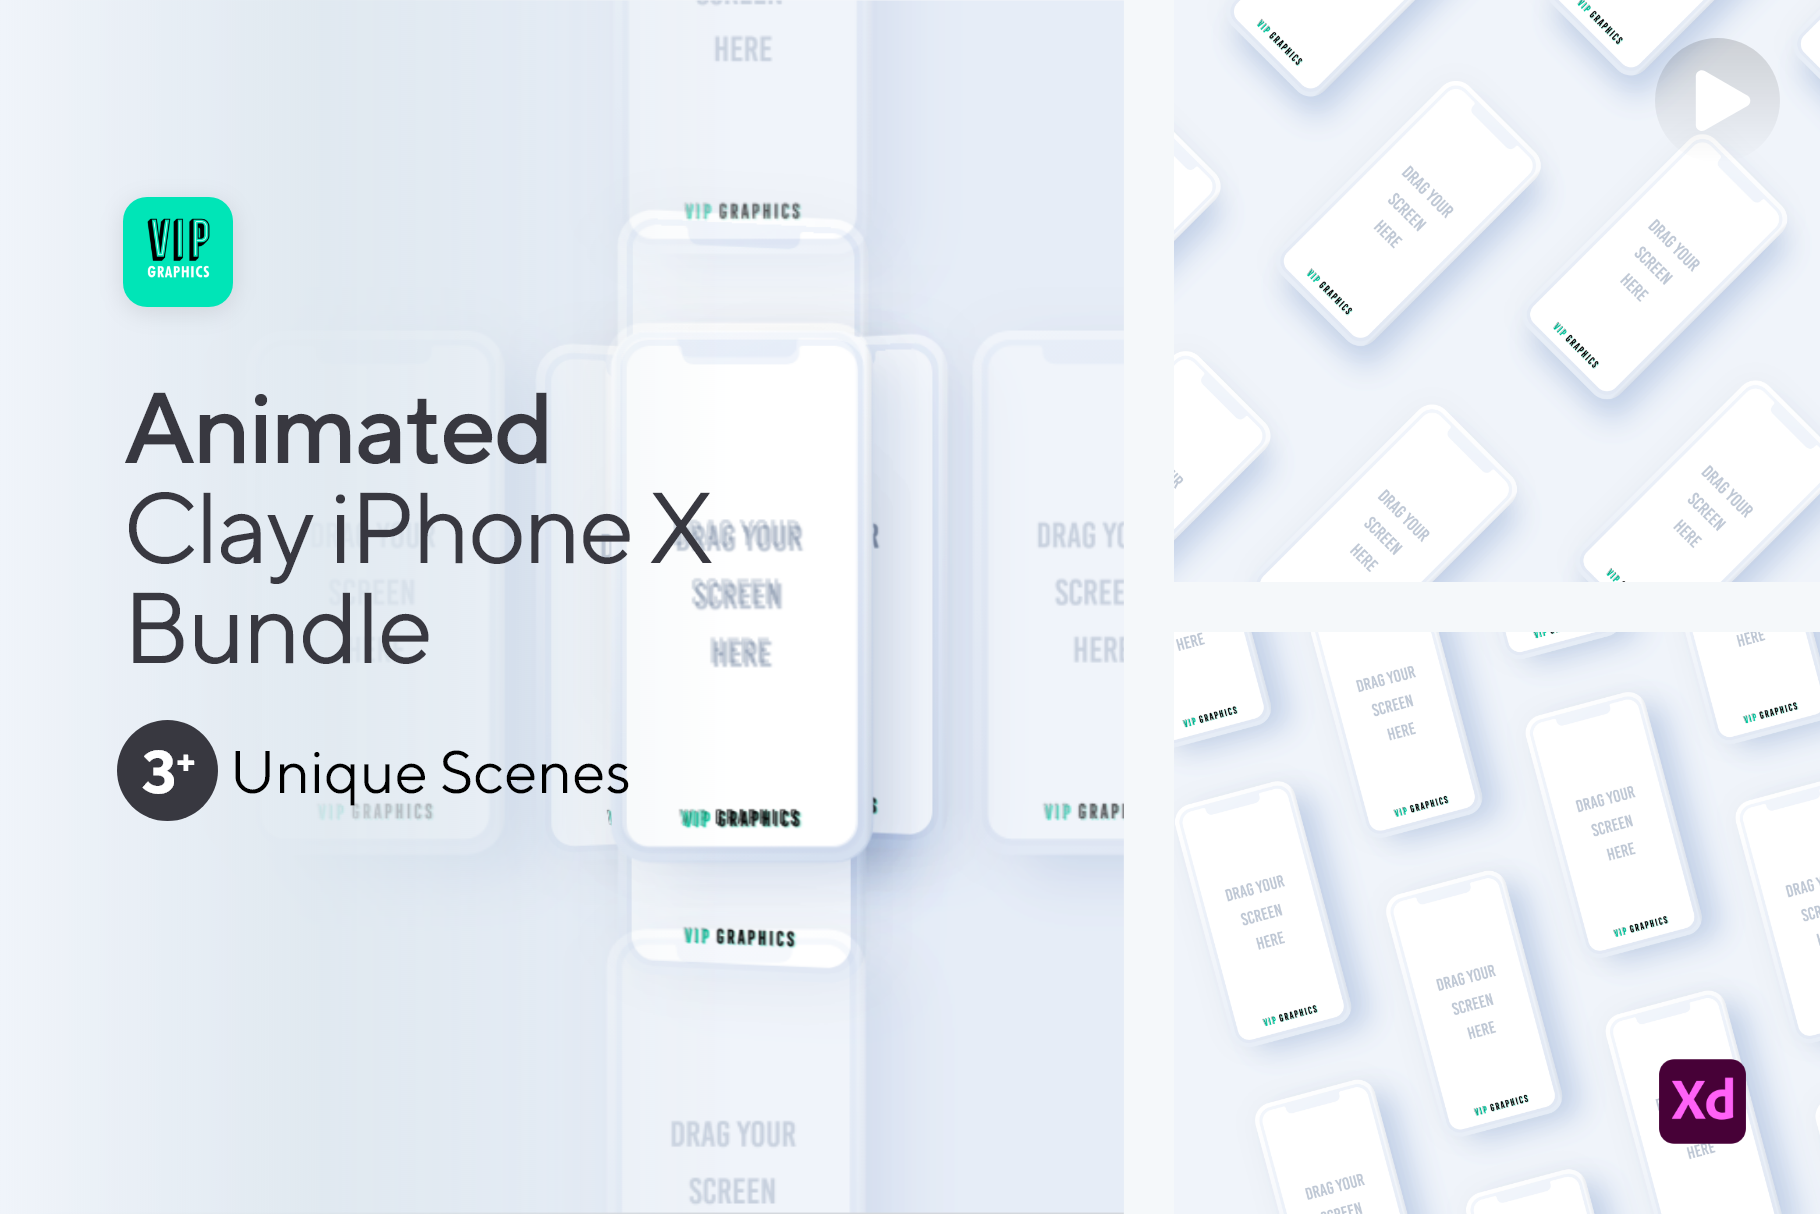 Video Mobile Mockup for Adobe XD - Animated Clay iPhones | VIP.graphics